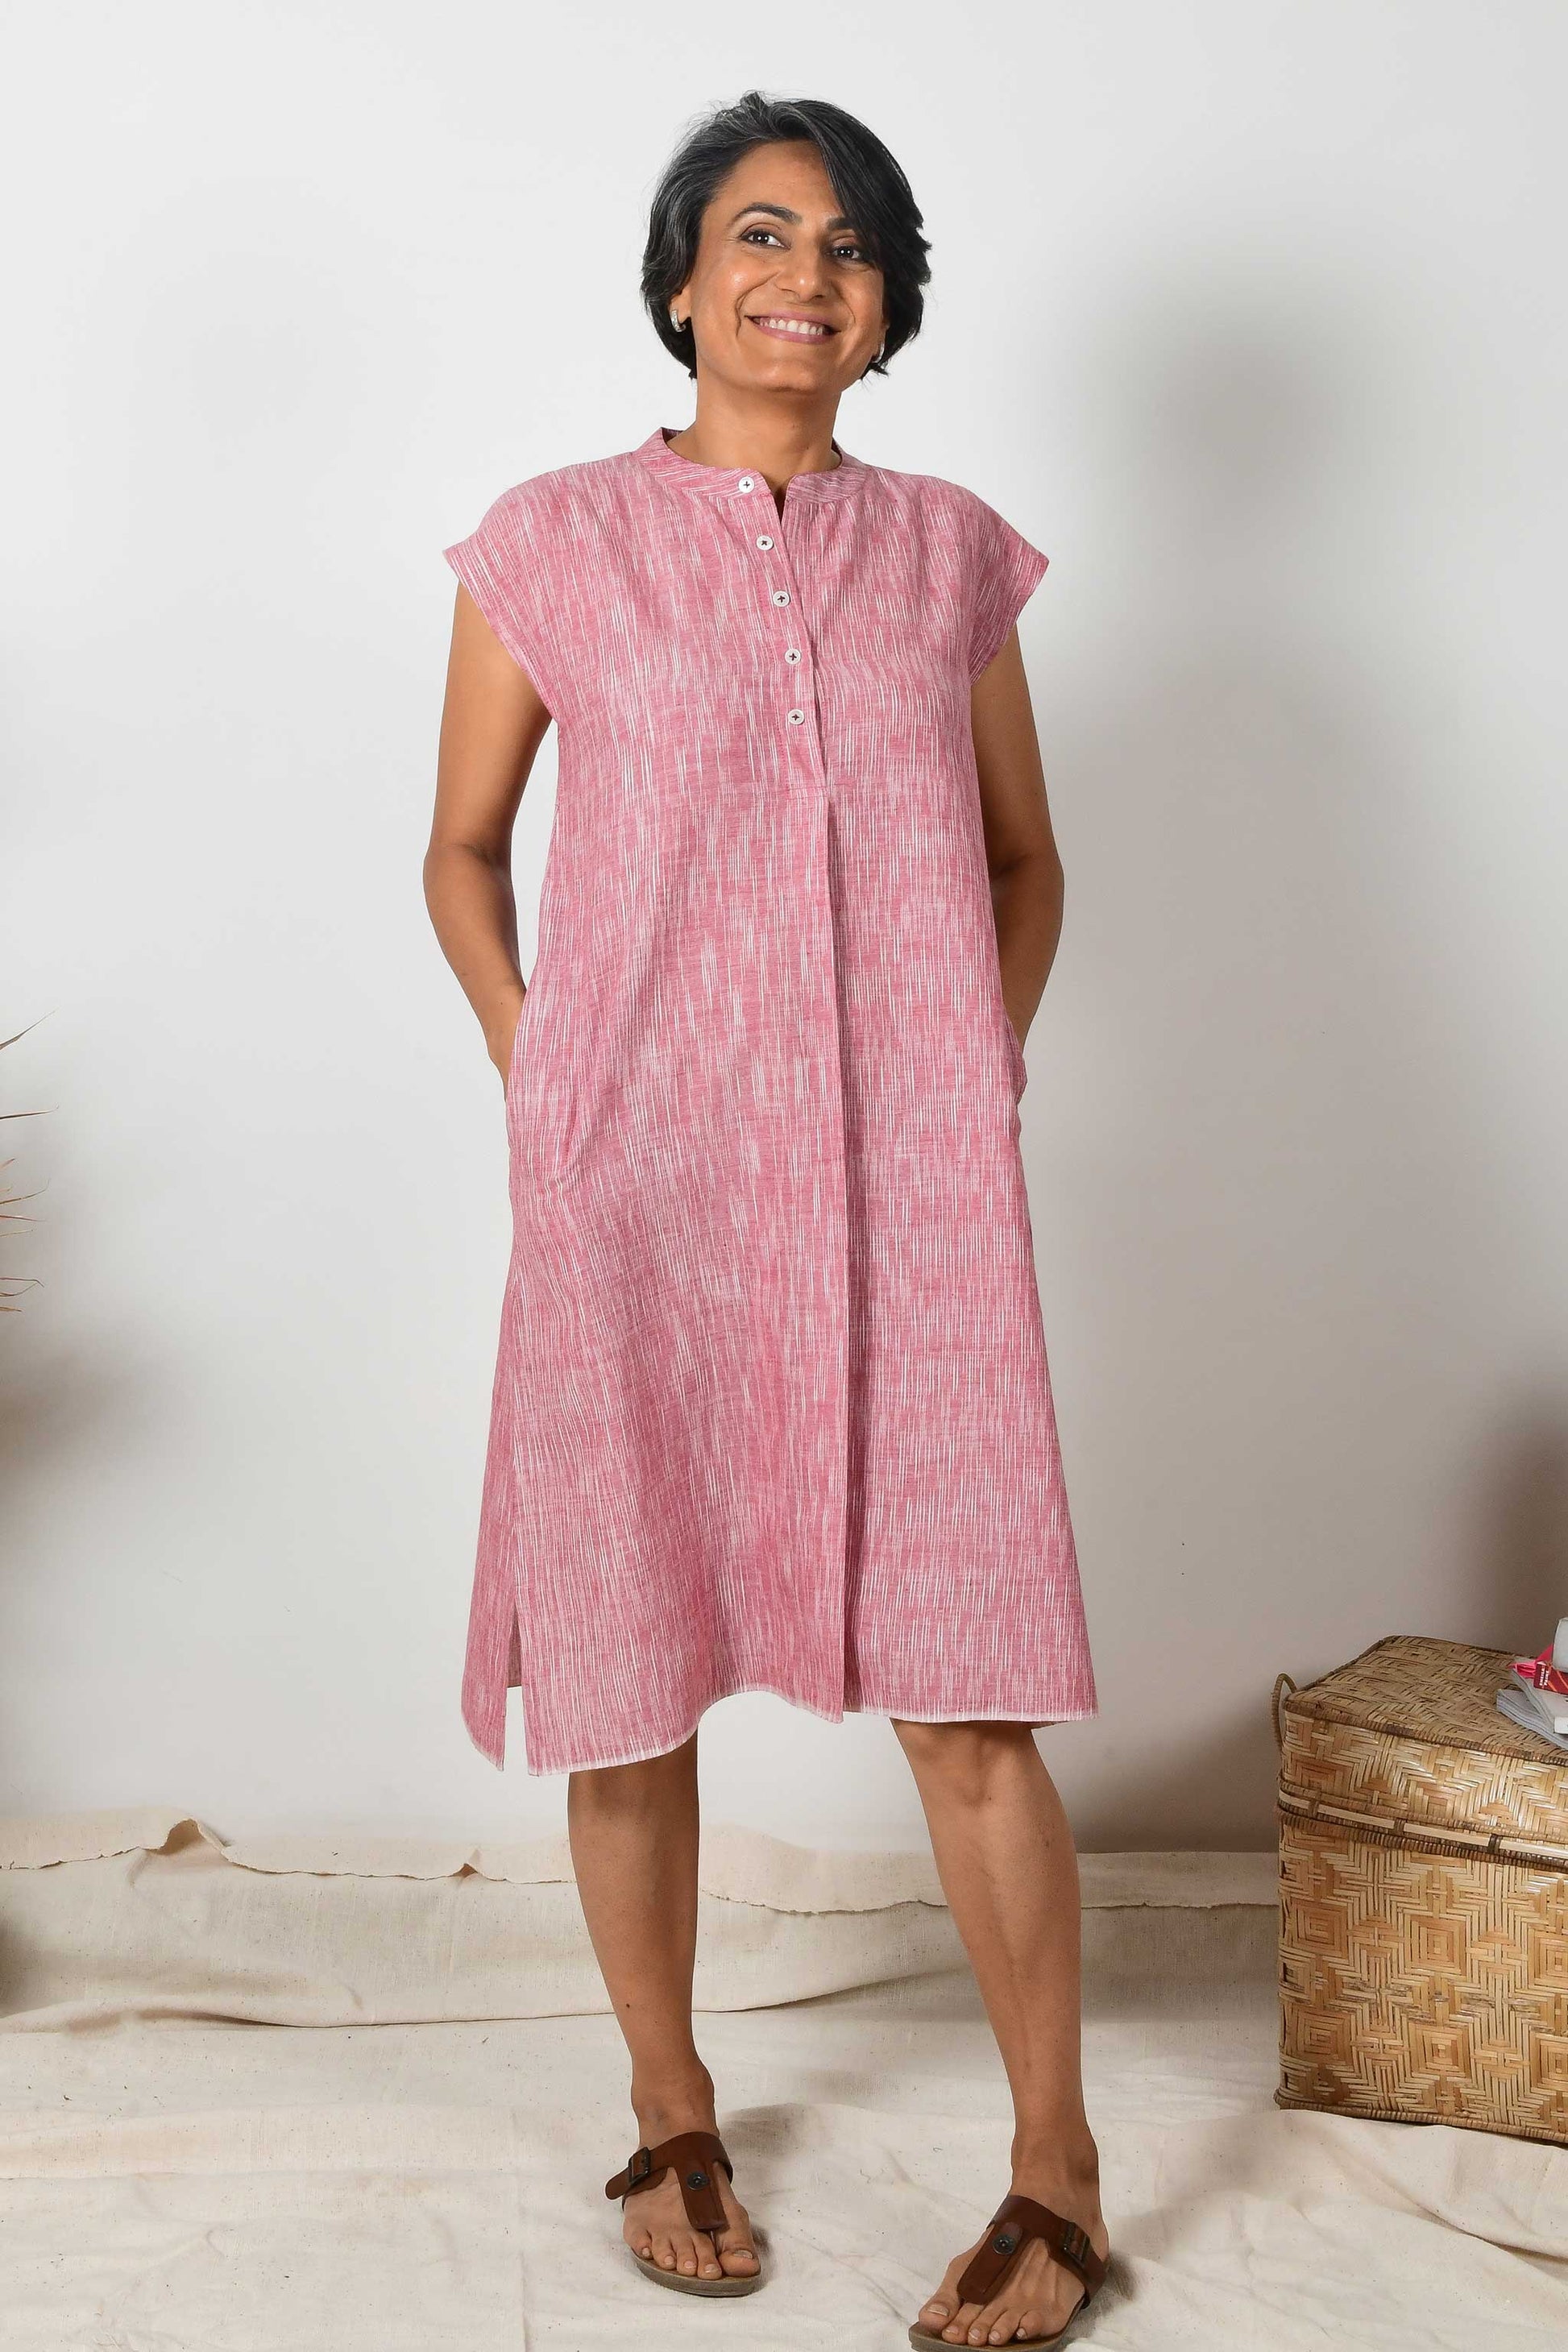 A smiling Indian woman wearing a short sleeved brick red cotton midi dress made with hand spun and hand woven natural fabric.